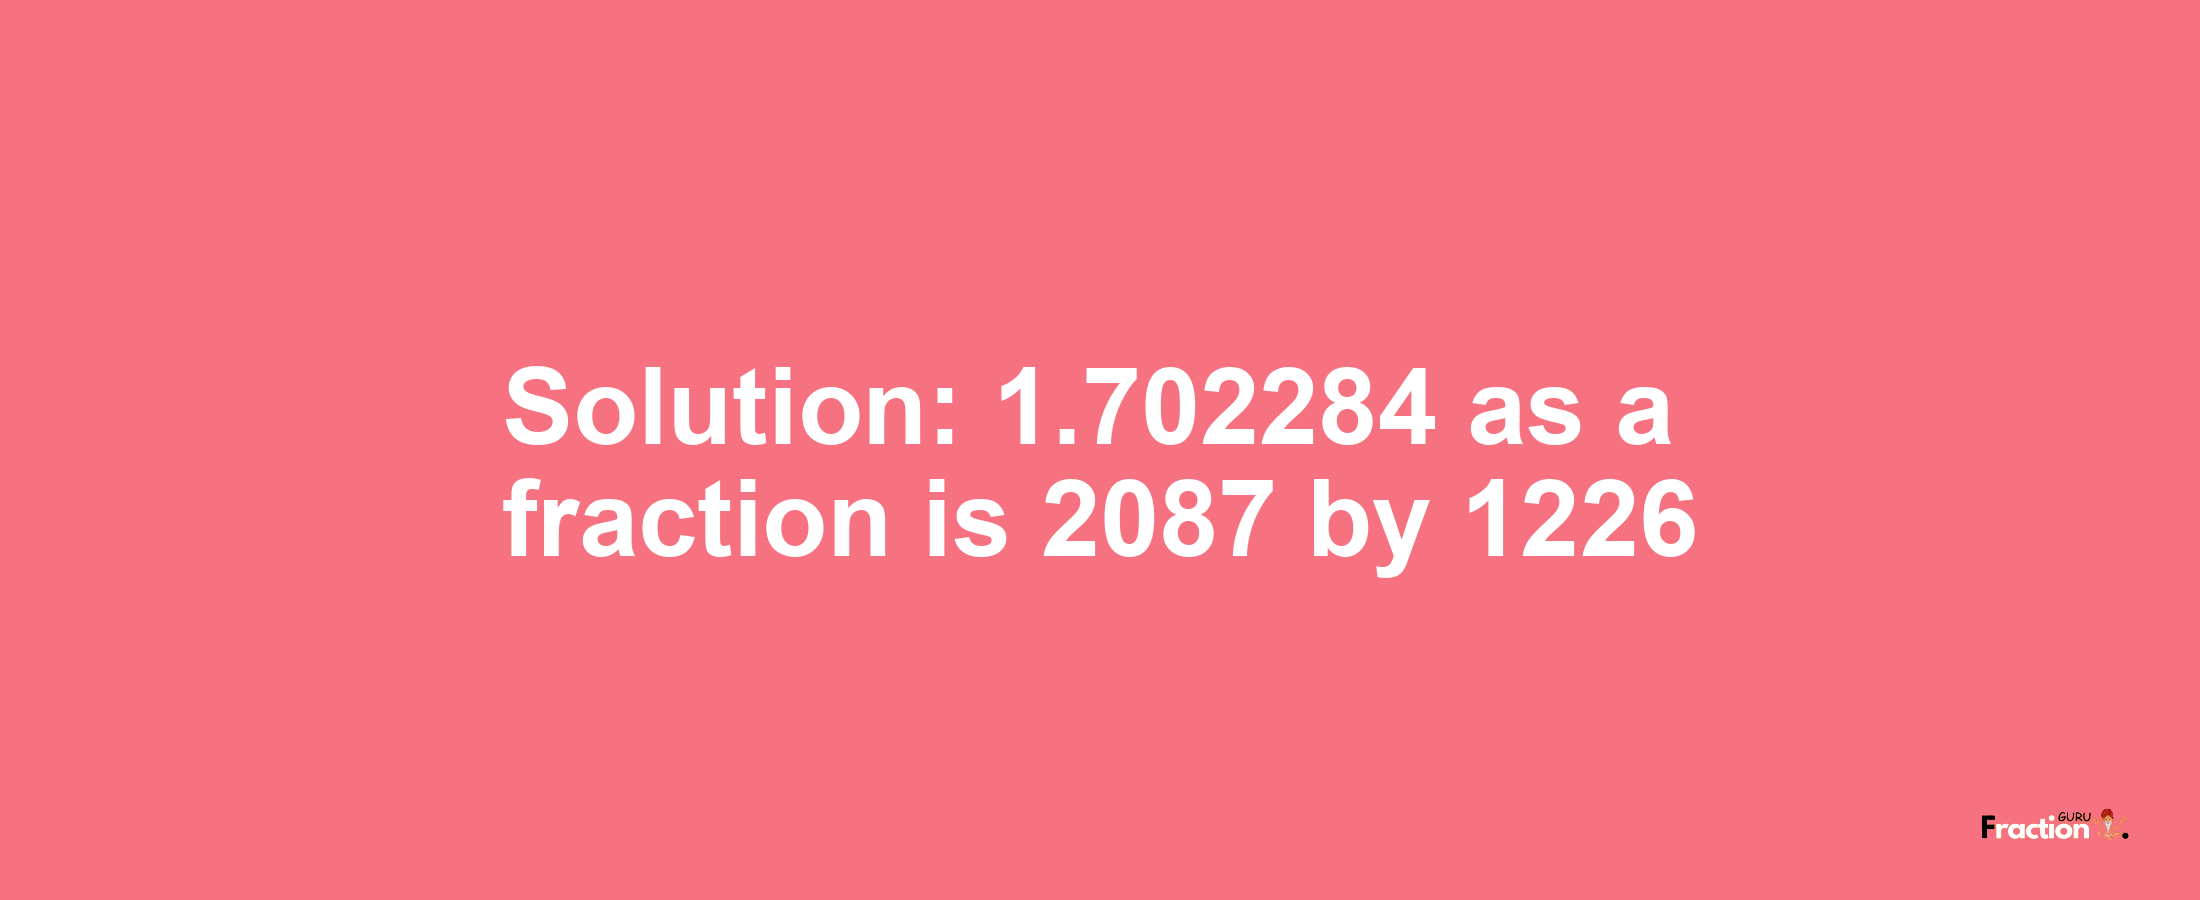 Solution:1.702284 as a fraction is 2087/1226